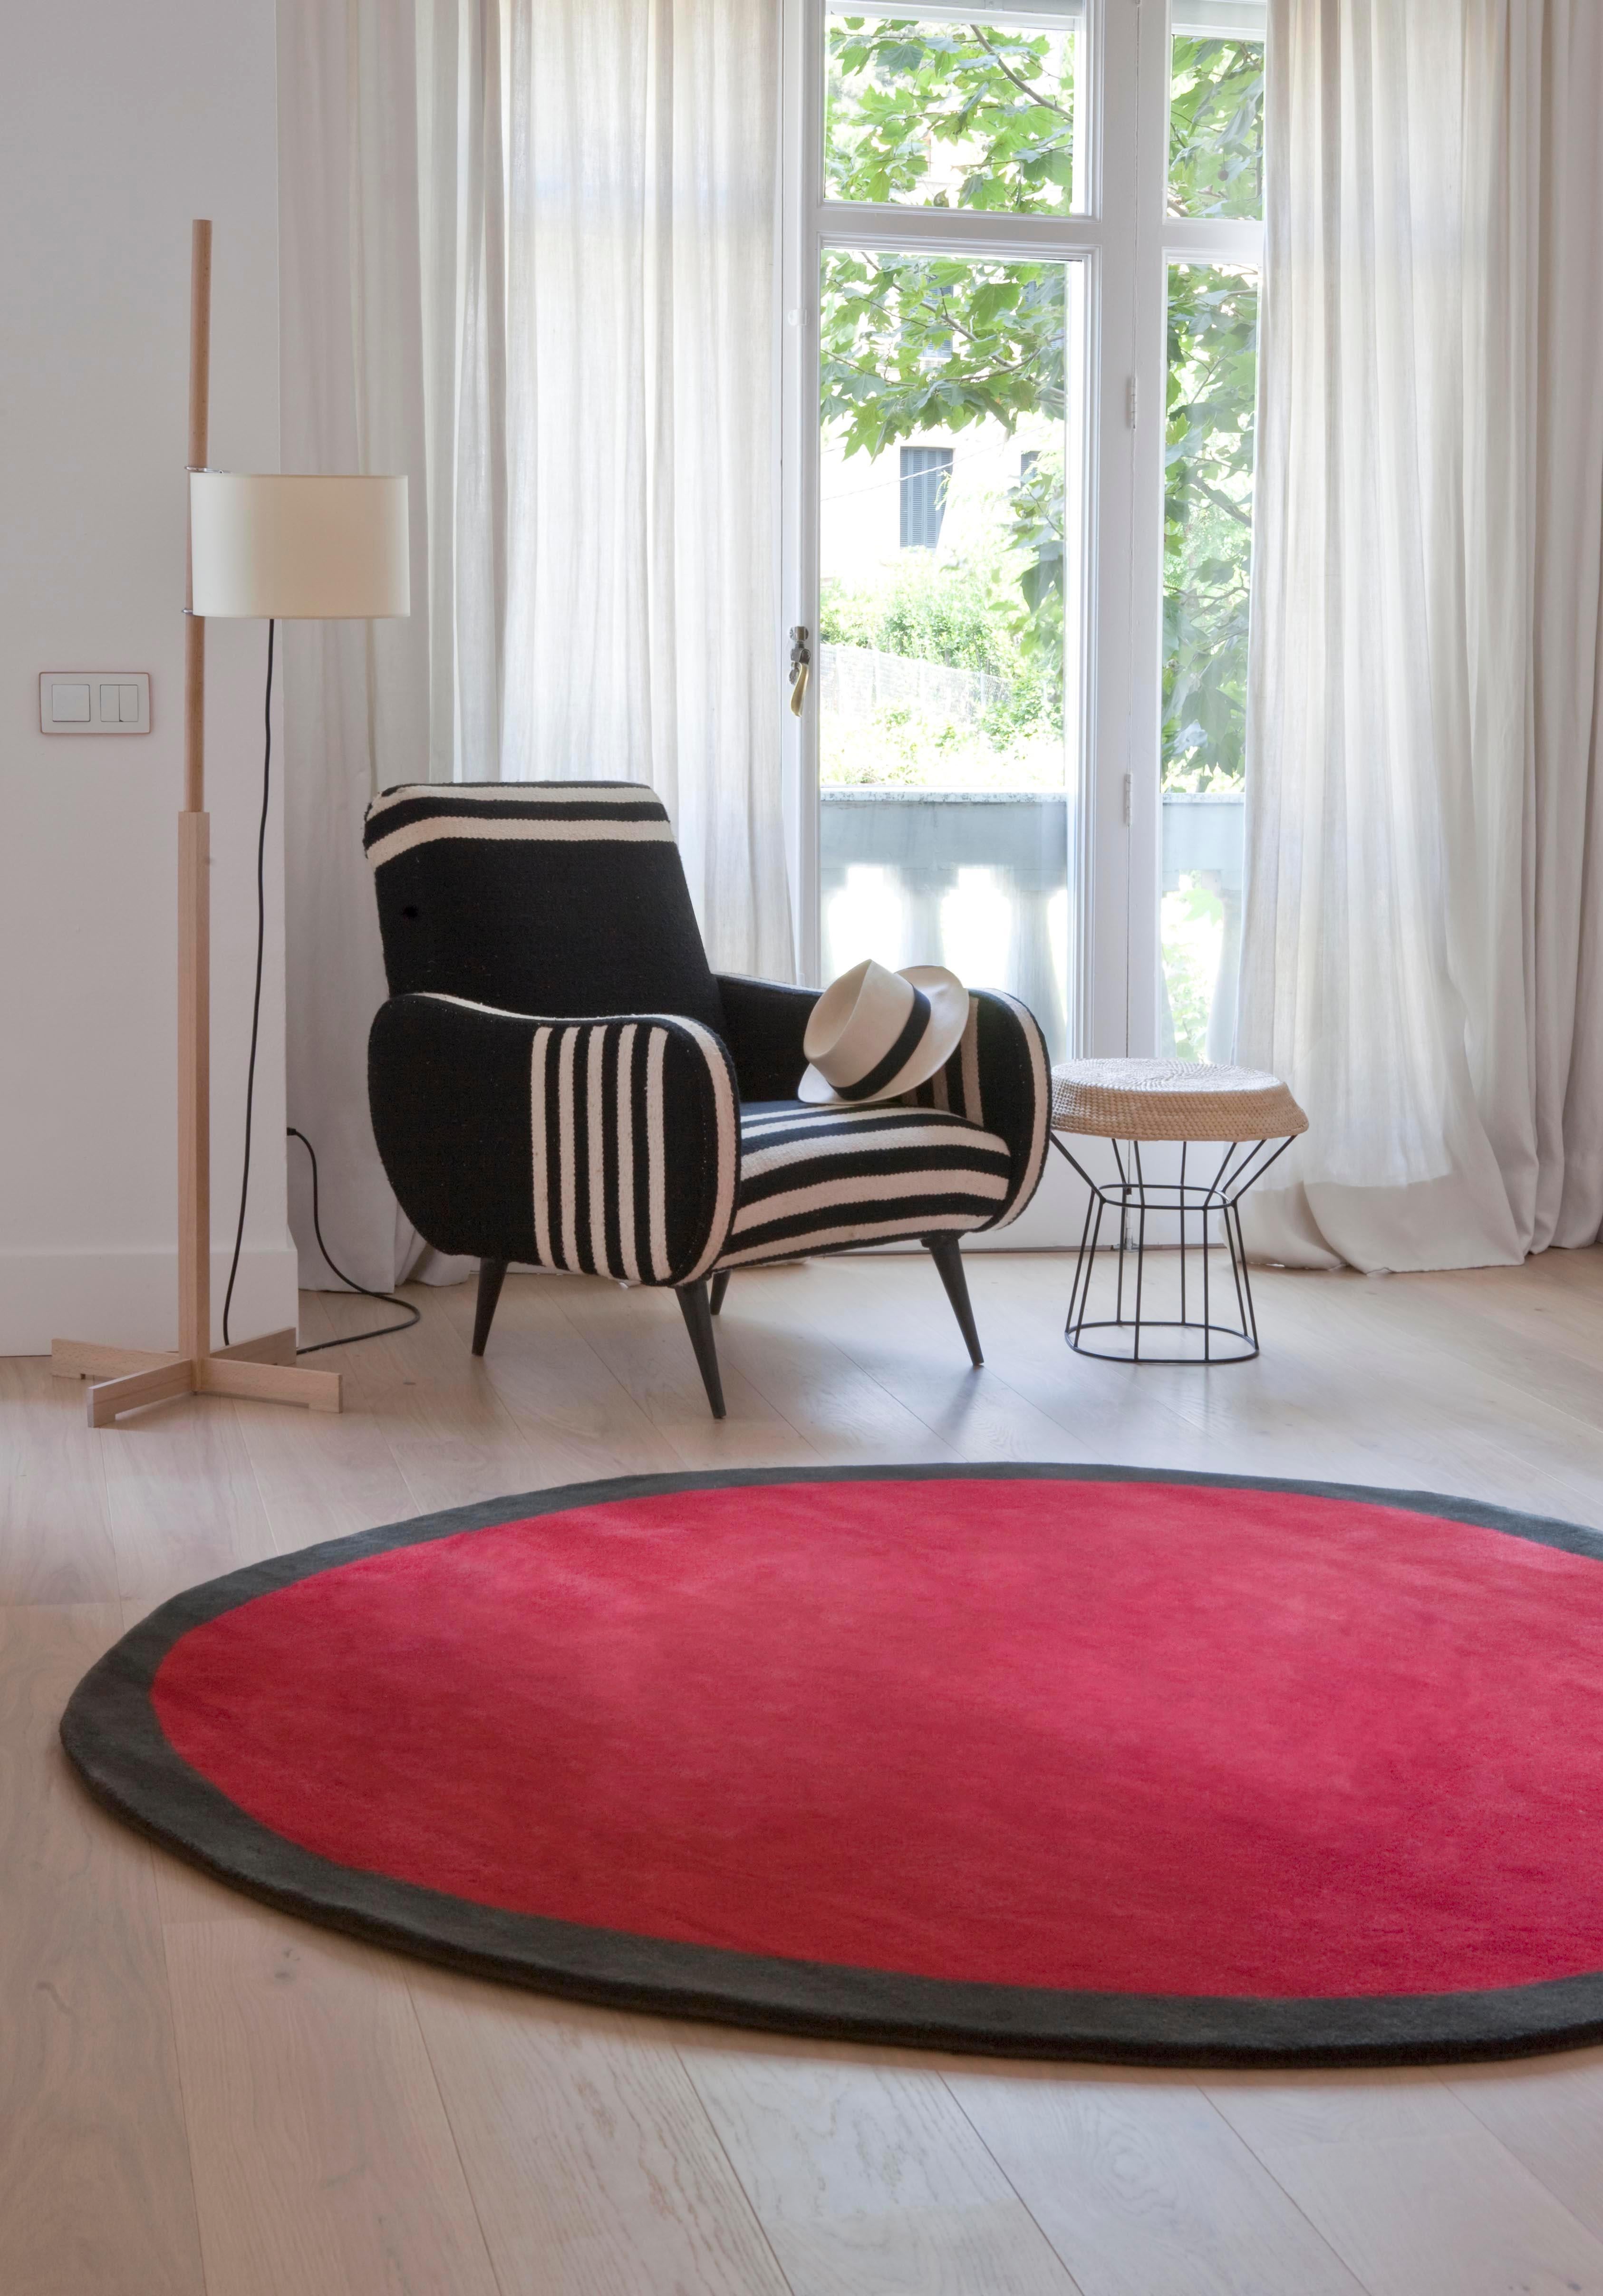 Large Nanimarquina 'Aros' round rug in red. Executed in 100% hand-tufted New Zealand wool. 

This geometric design comprised of contrasting colors is a rug that is never exact or symmetrical. Its subtle asymmetry invites freedom from conventional